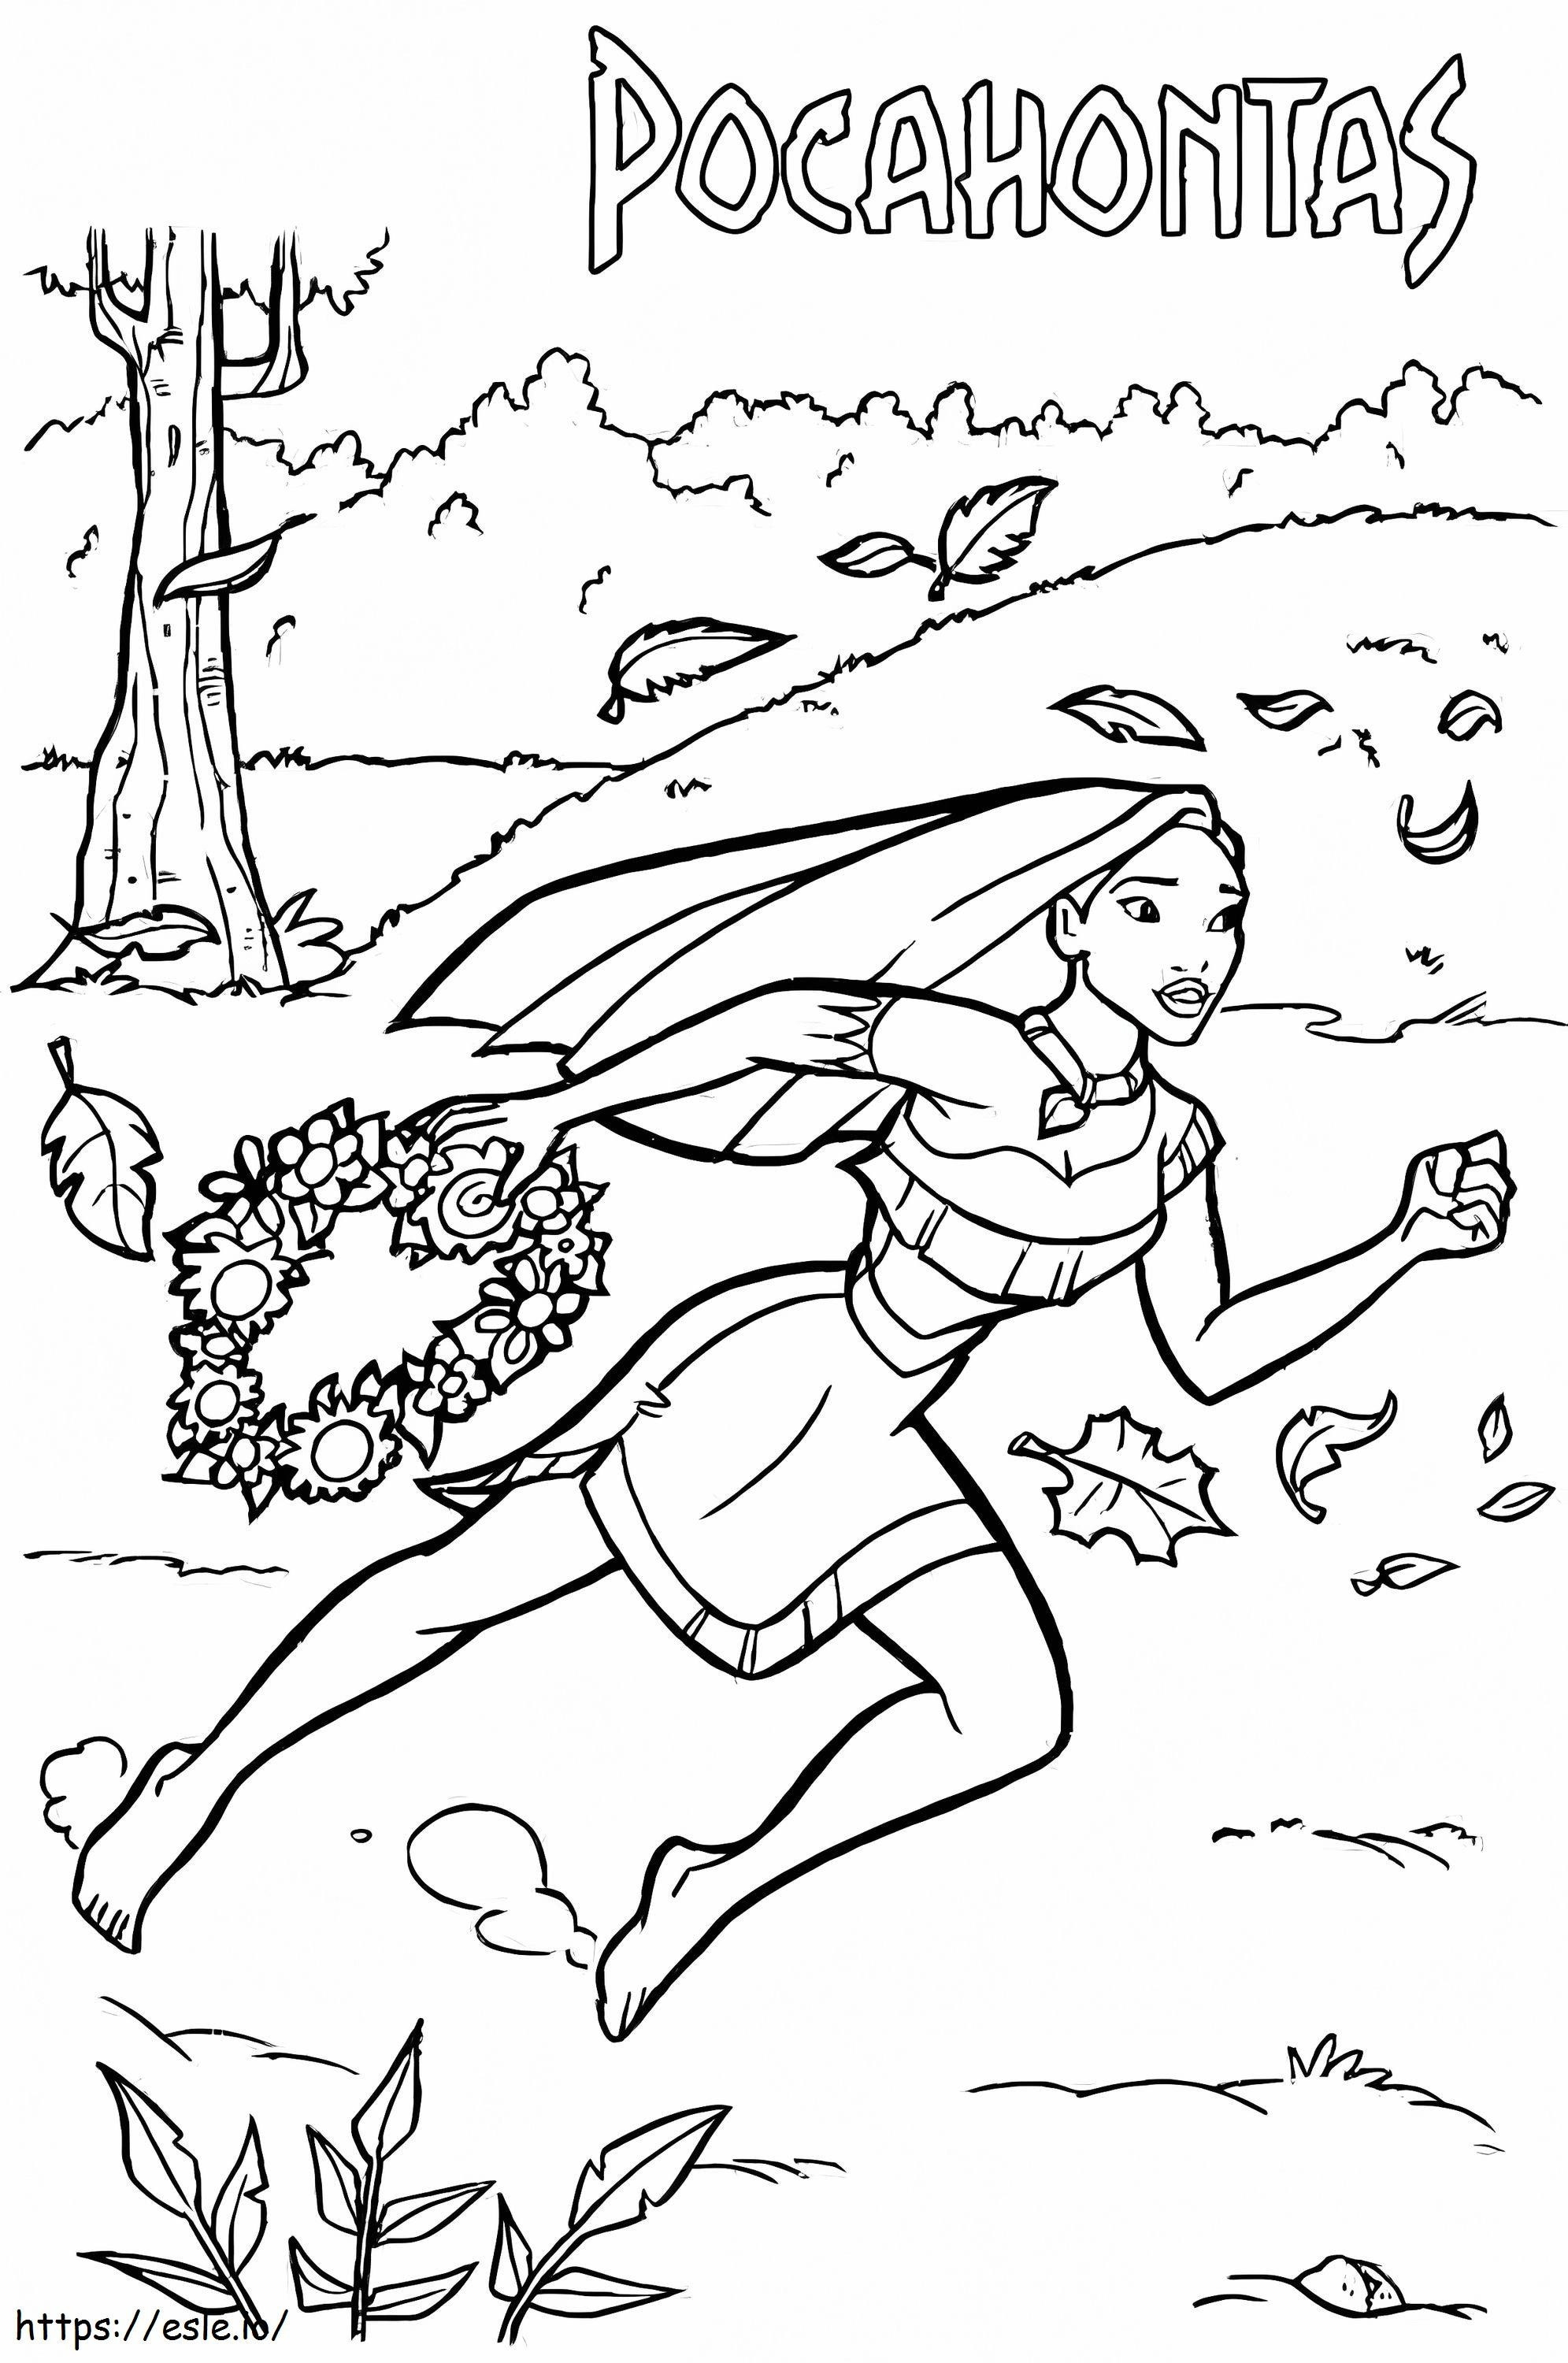 Pocahontas Is Running coloring page